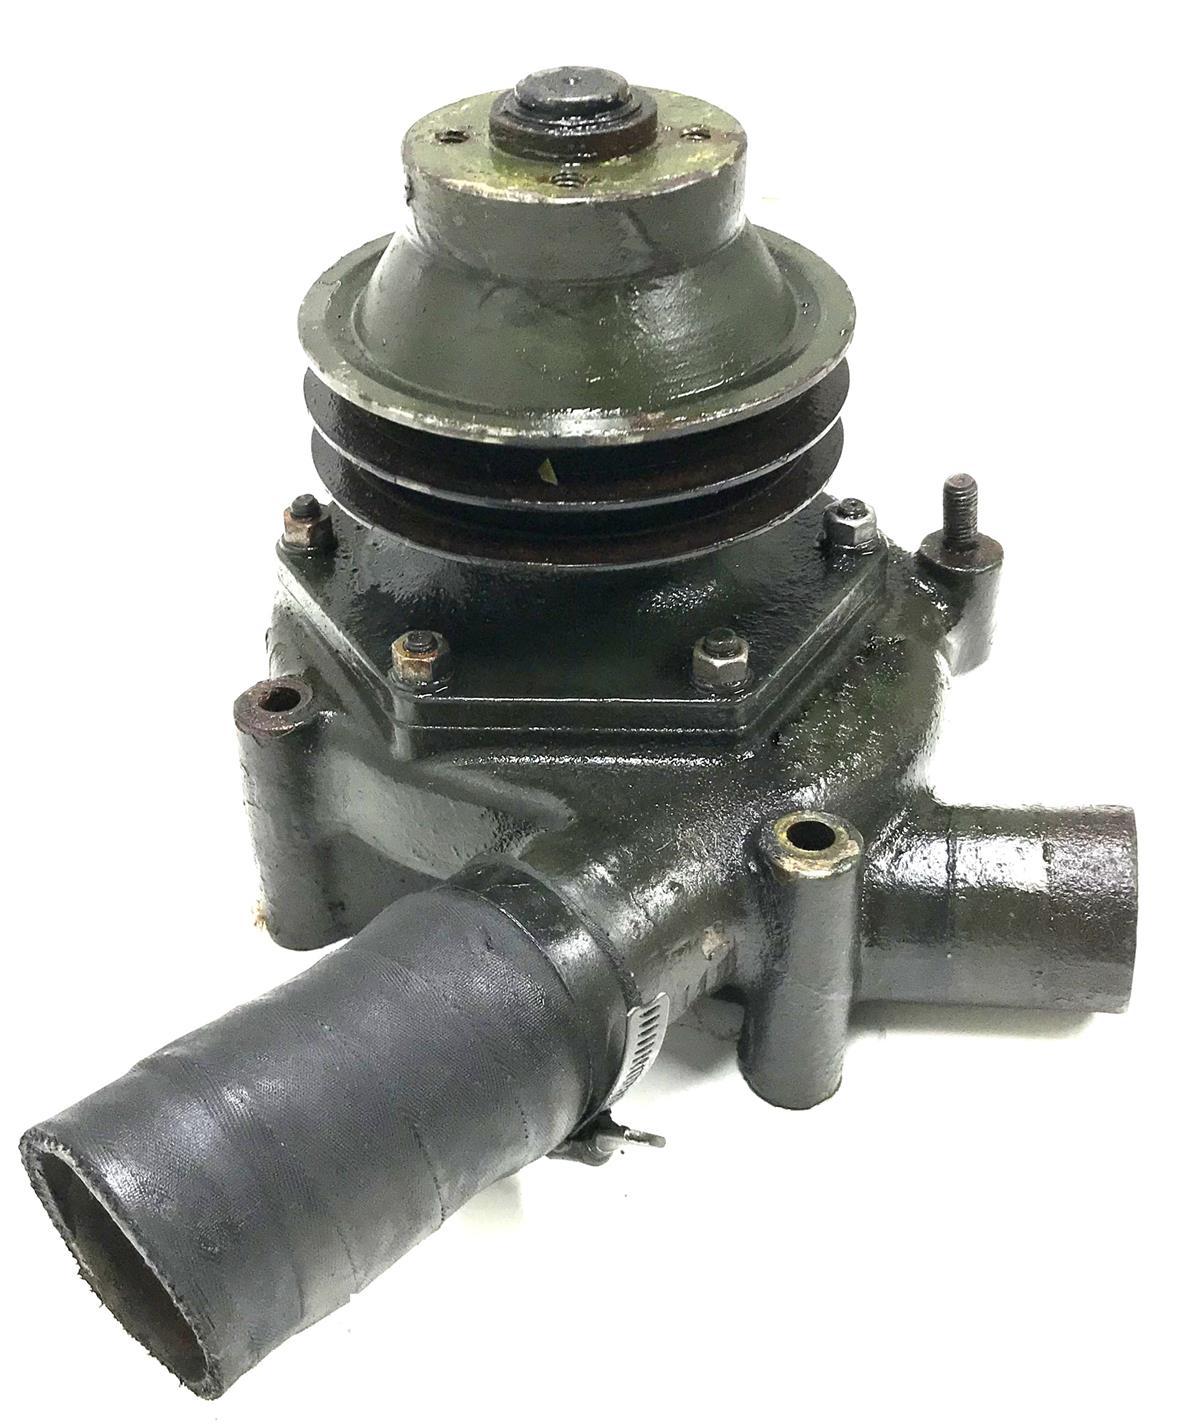 COM-5355 | COM-5355  Multi-Fuel Engine Water Pump Housing With Pulley  (3).jpg